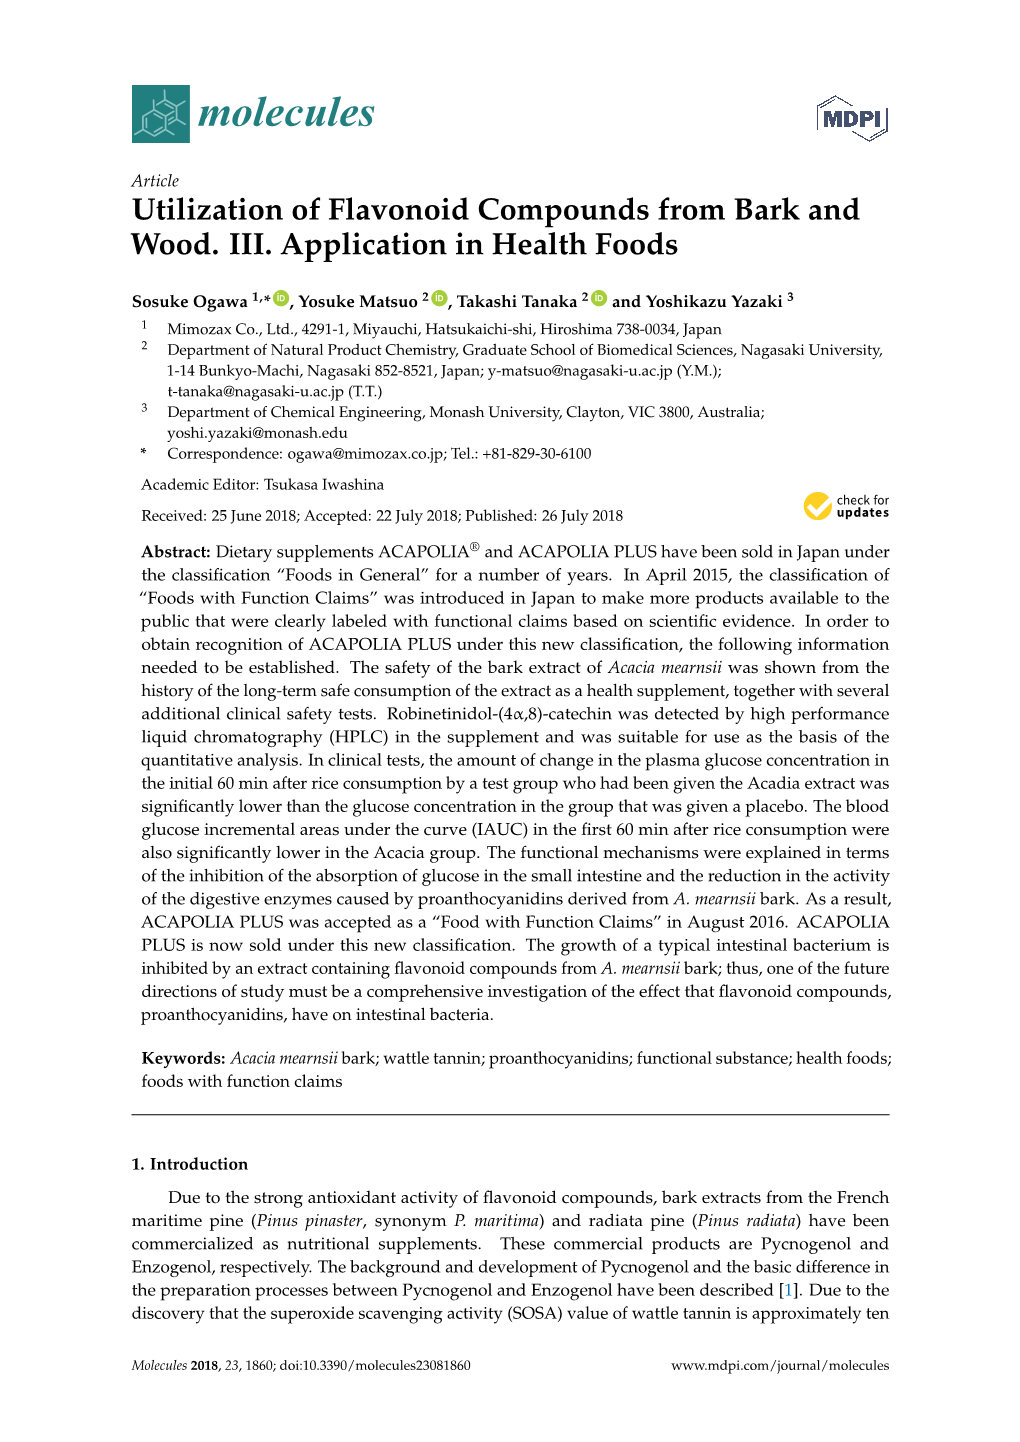 Utilization of Flavonoid Compounds from Bark and Wood. III. Application in Health Foods